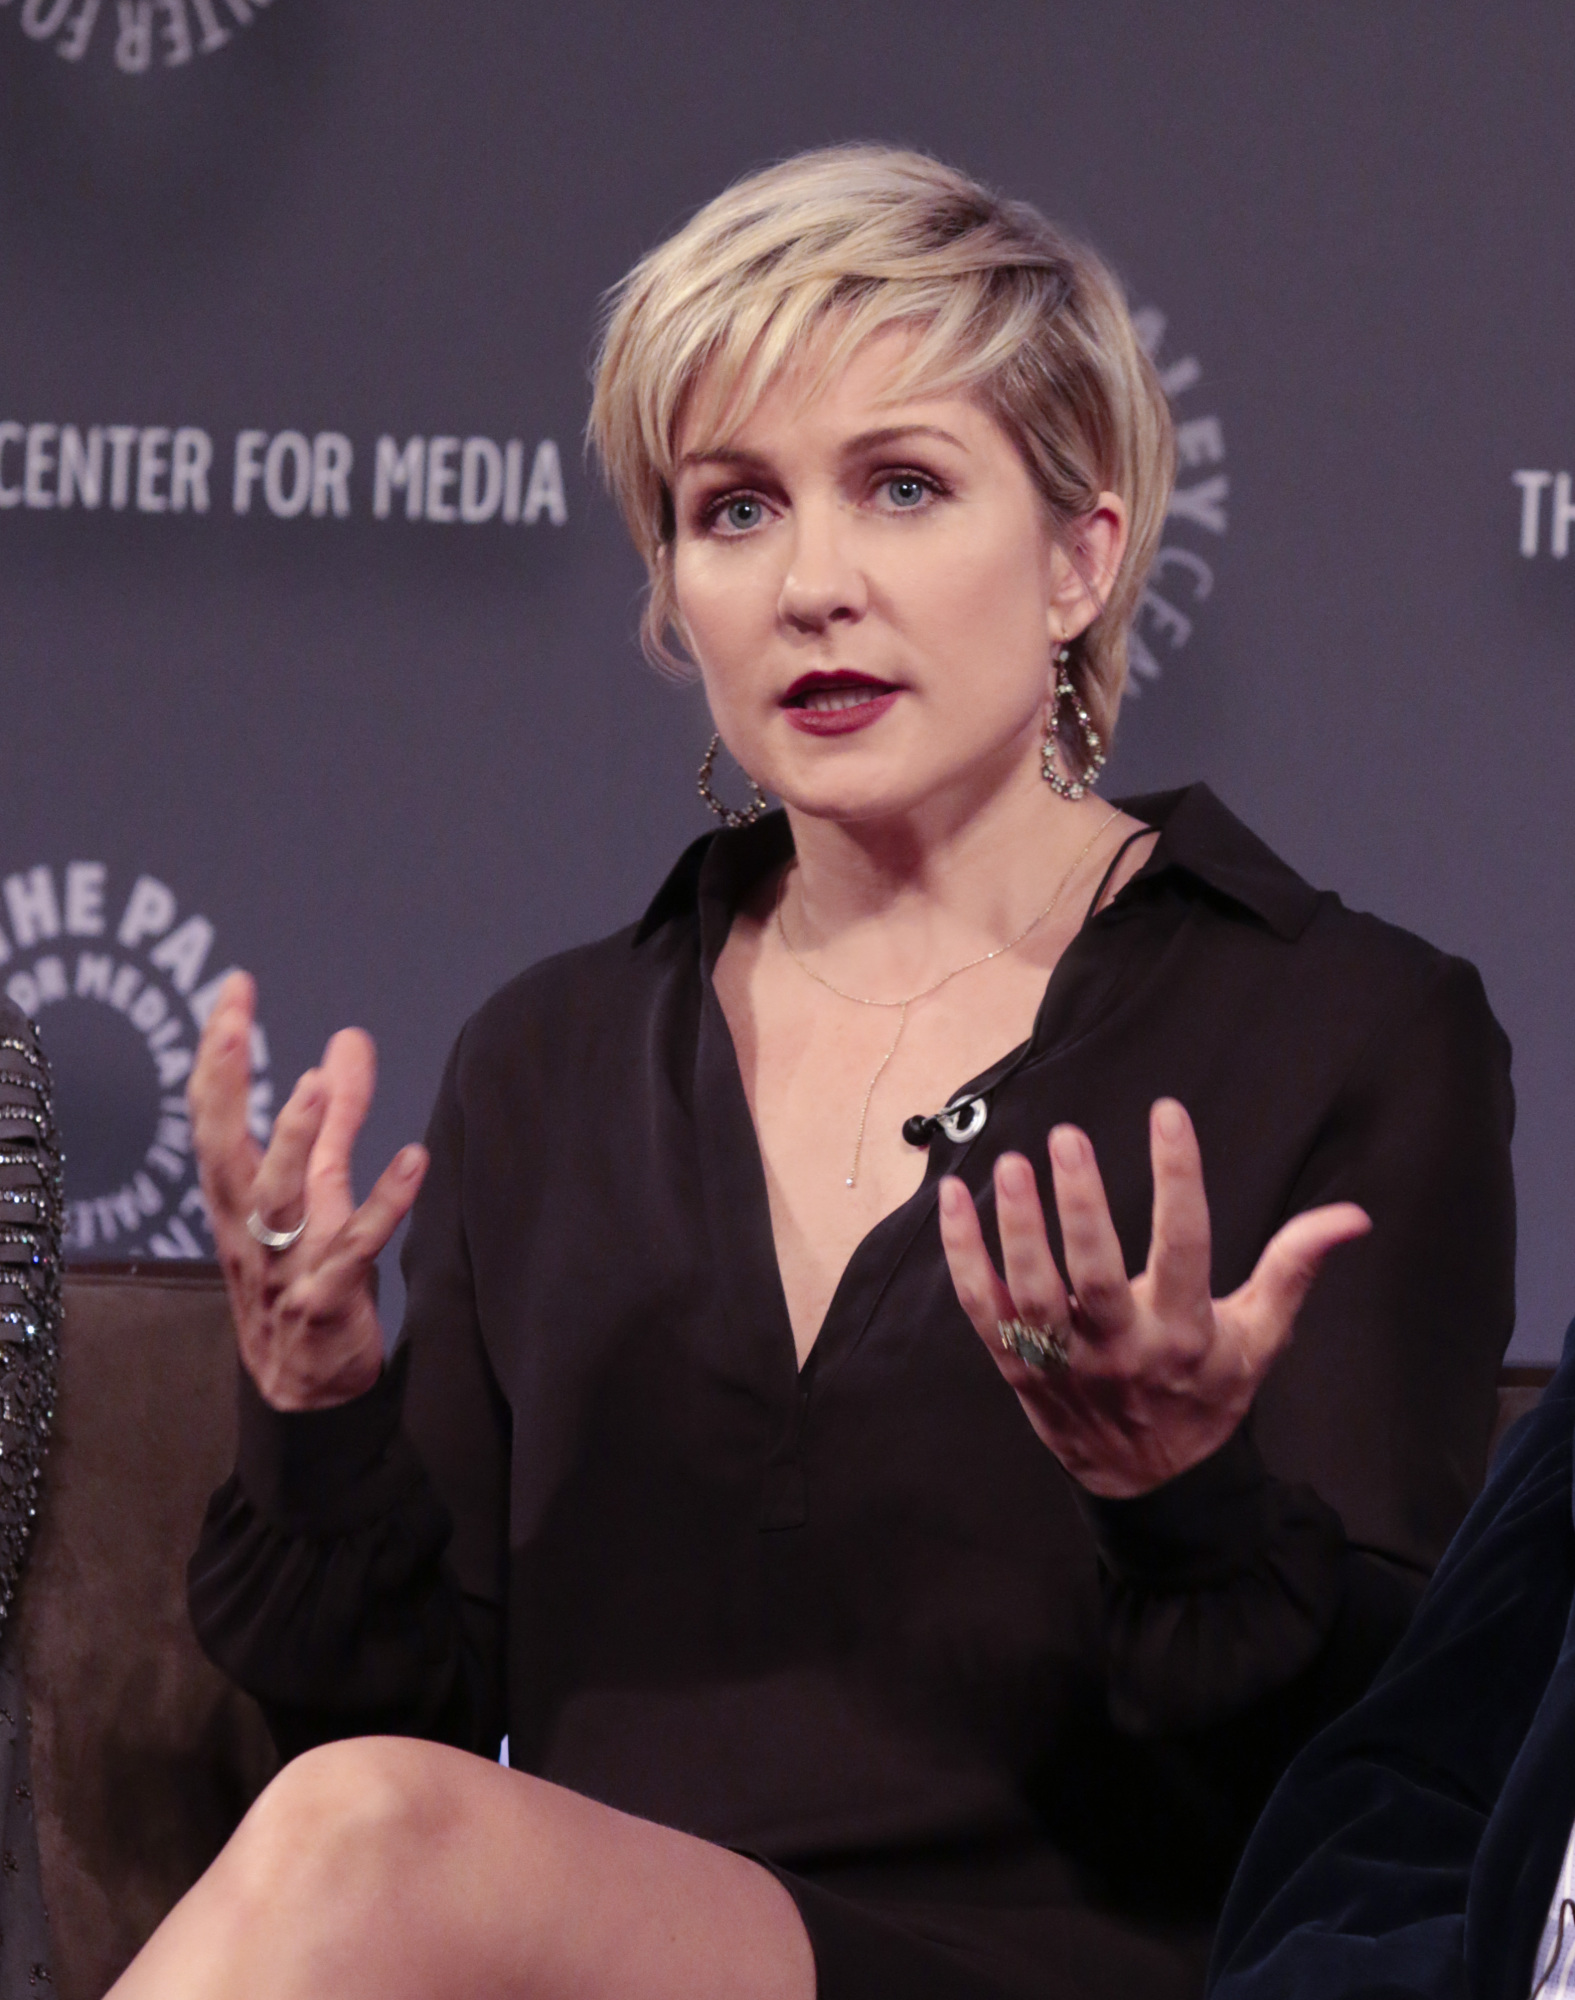 12. Amy Carlson's expressive hand gestures.